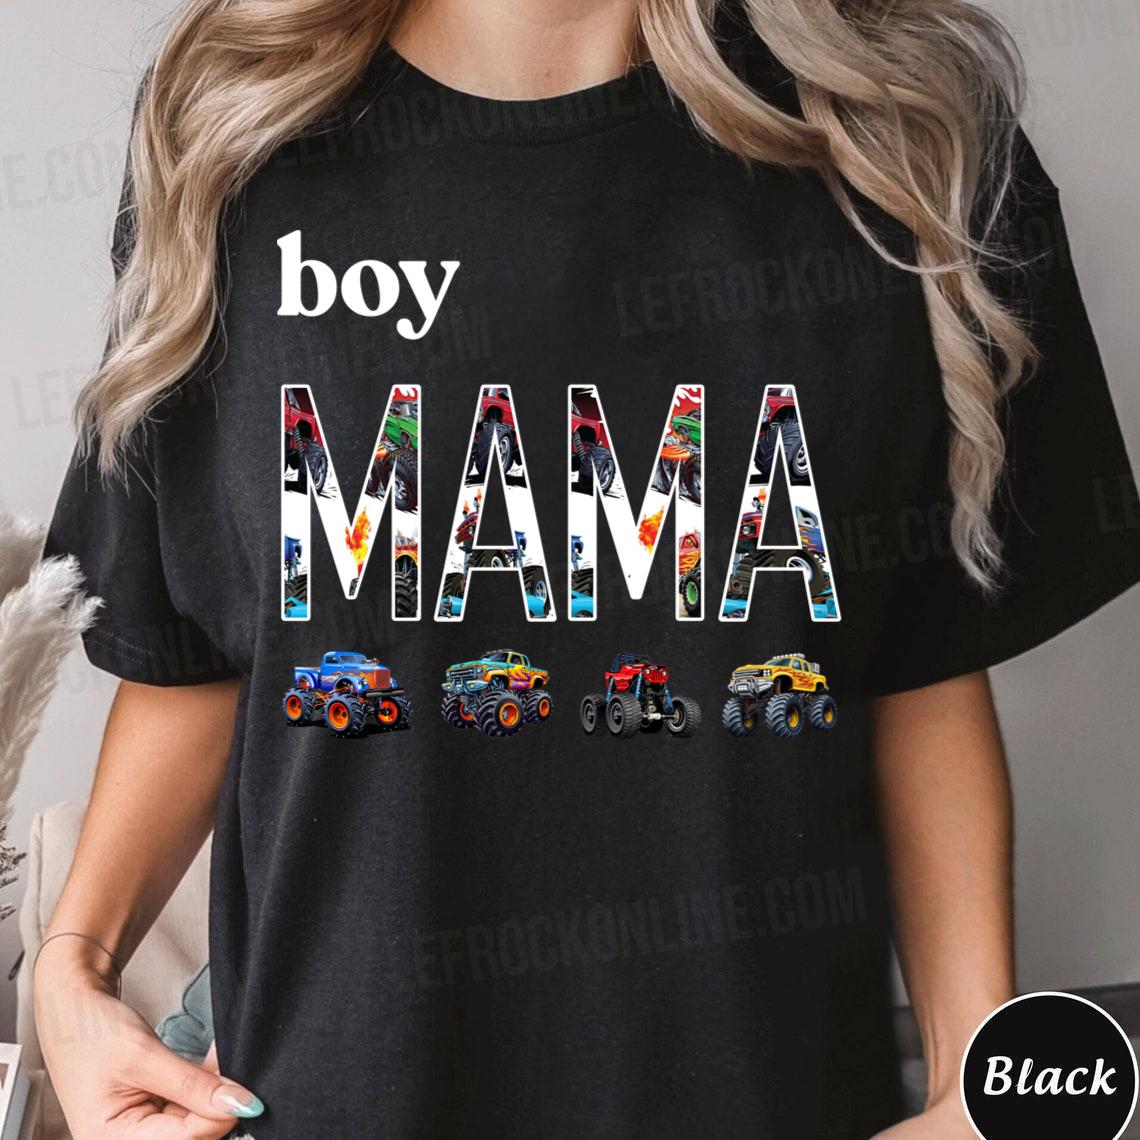 Boy MAMA Colorful Monster Truck Monster Truck Tshirt